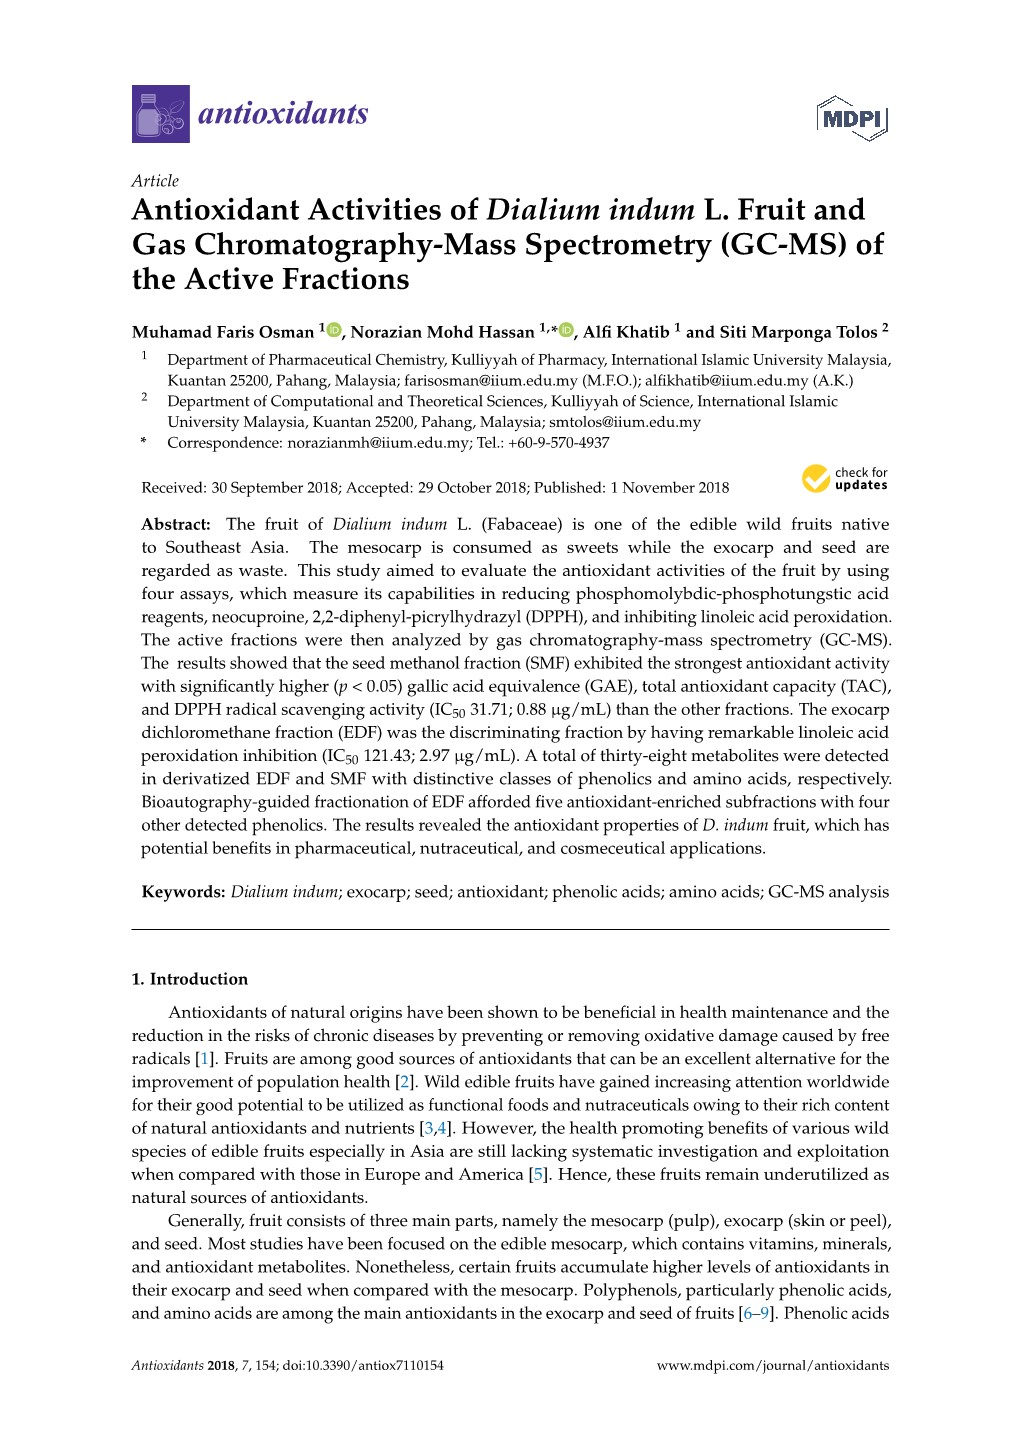 Antioxidant Activities of Dialium Indum L. Fruit and Gas Chromatography-Mass Spectrometry (GC-MS) of the Active Fractions